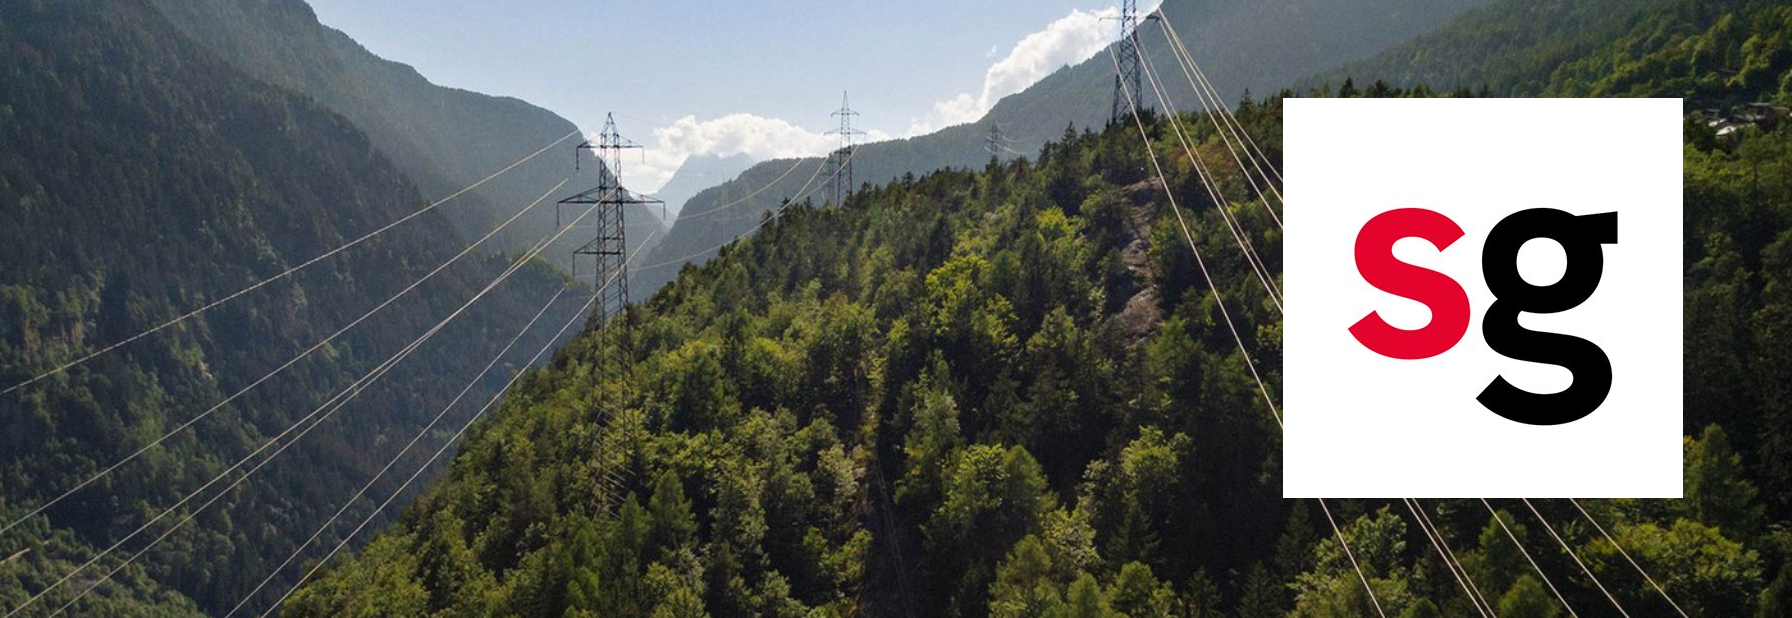 Swissgrid records capital increase and changes to its articles of incorporation